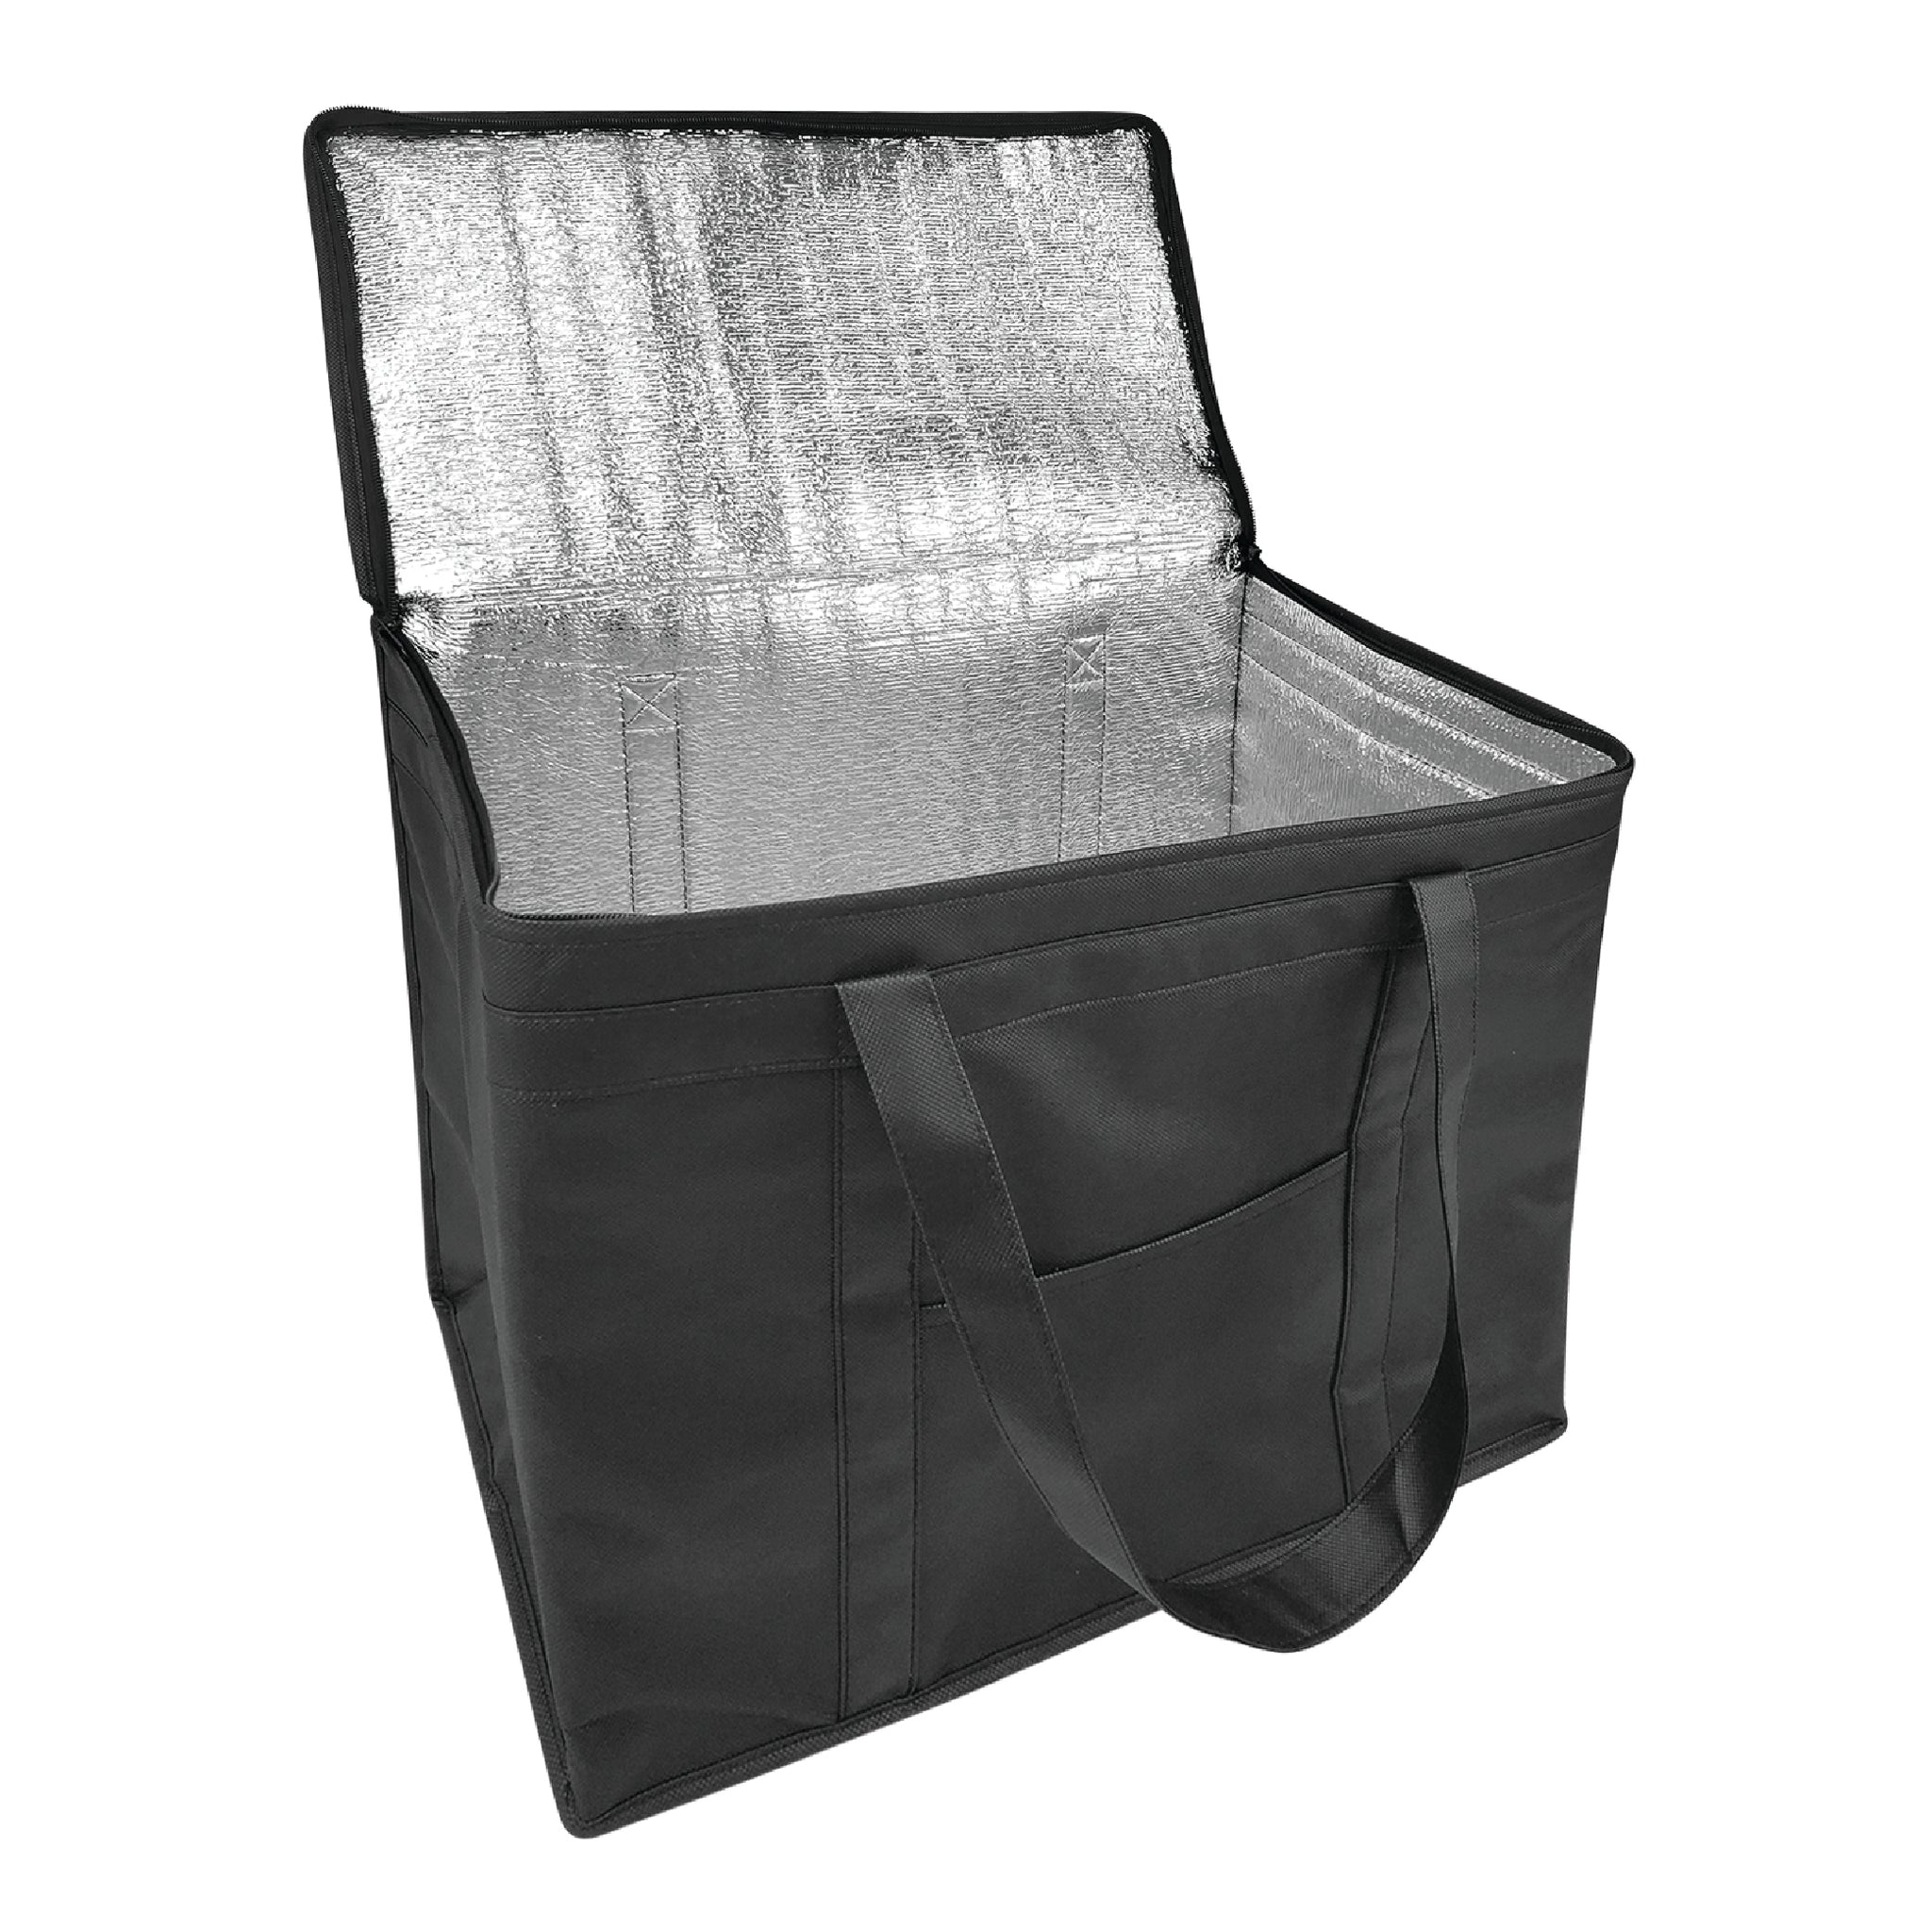 Jumbo Non-woven Delivery Cooler Bag with Zipper Closure 18”W x 10"D x 14”H - 2.5mm insulation